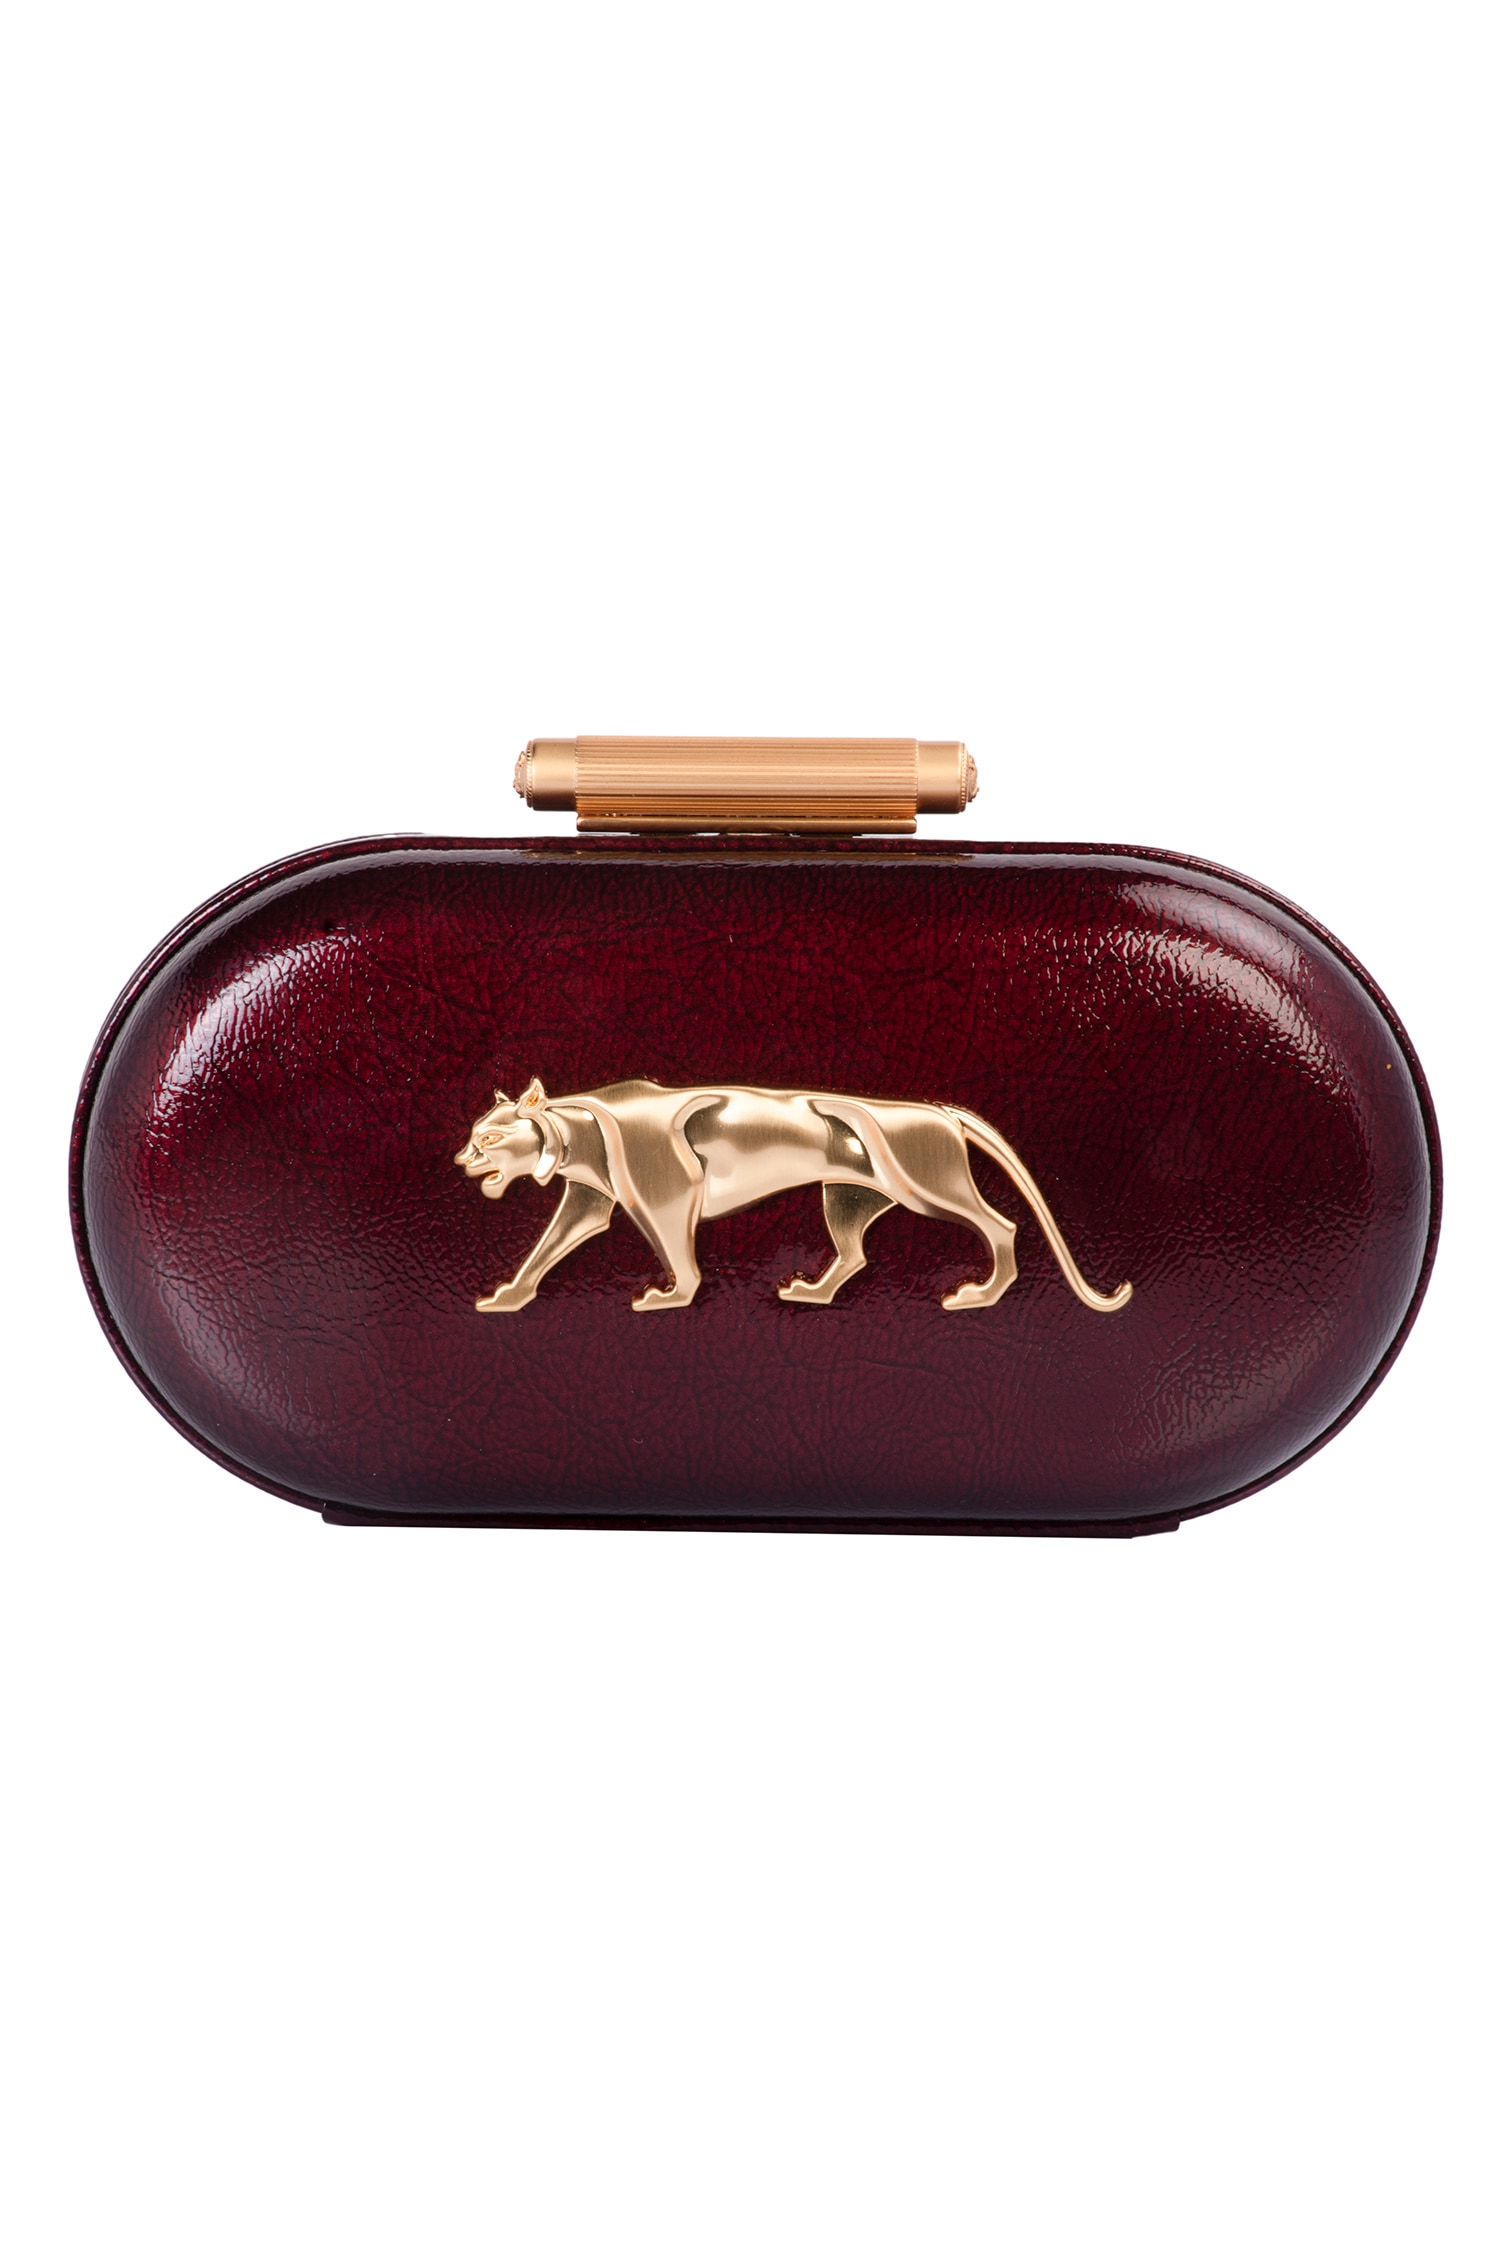 Sabyasachi Mulberry - Purple Embellished The Royal Bengal Minaudiere Clutch